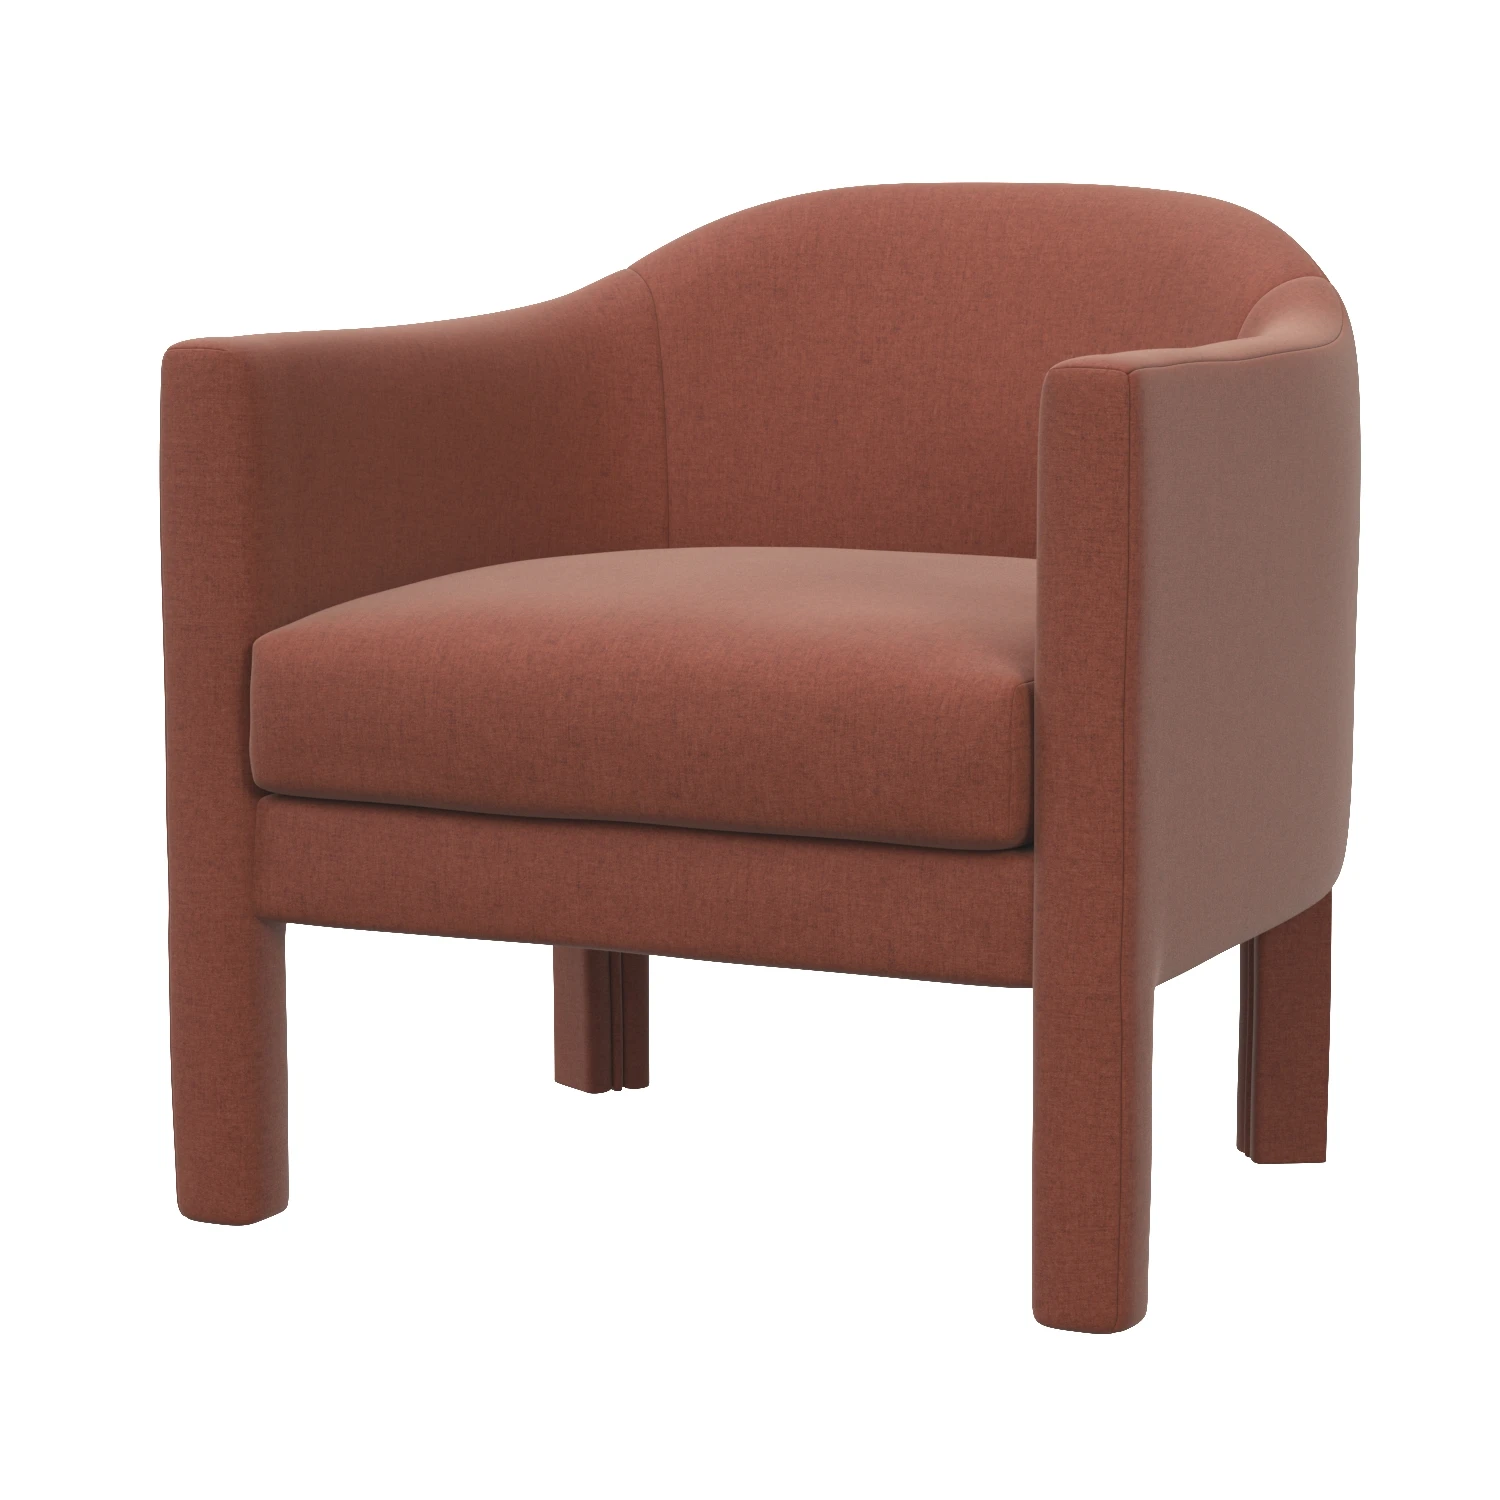 Isabella Upholstered Chair 3D Model_01